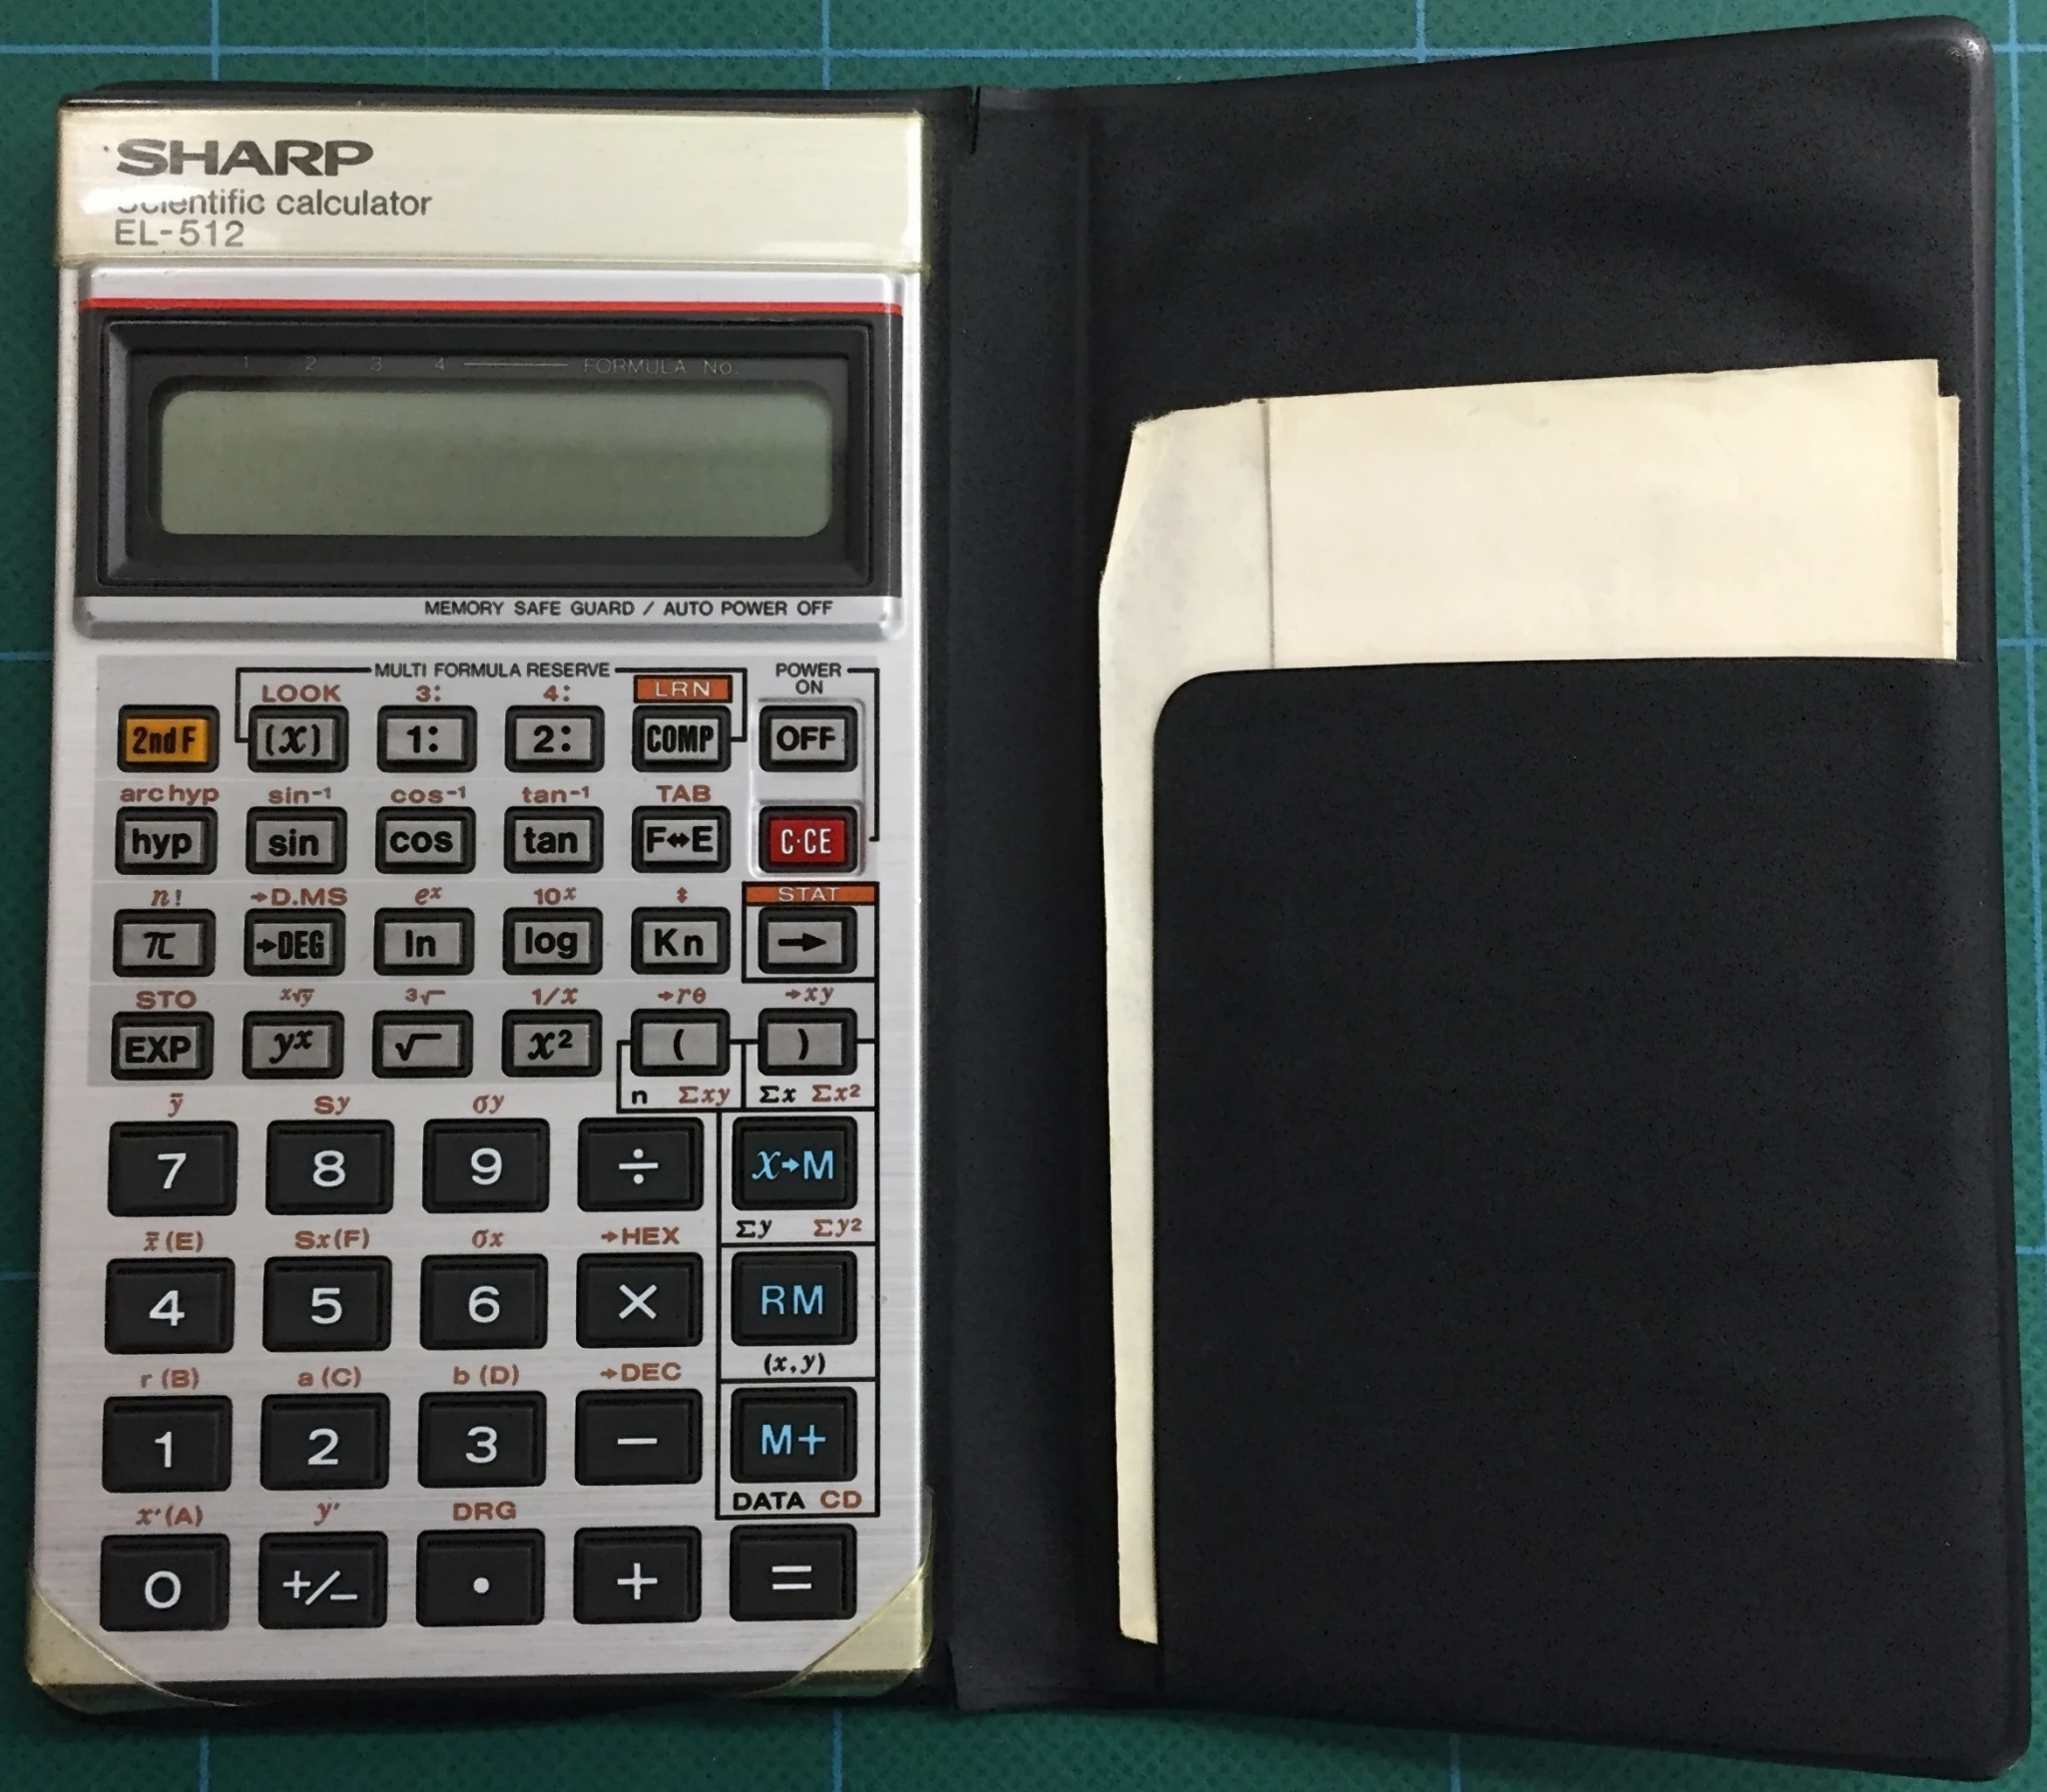 this is a picture of an old calculator